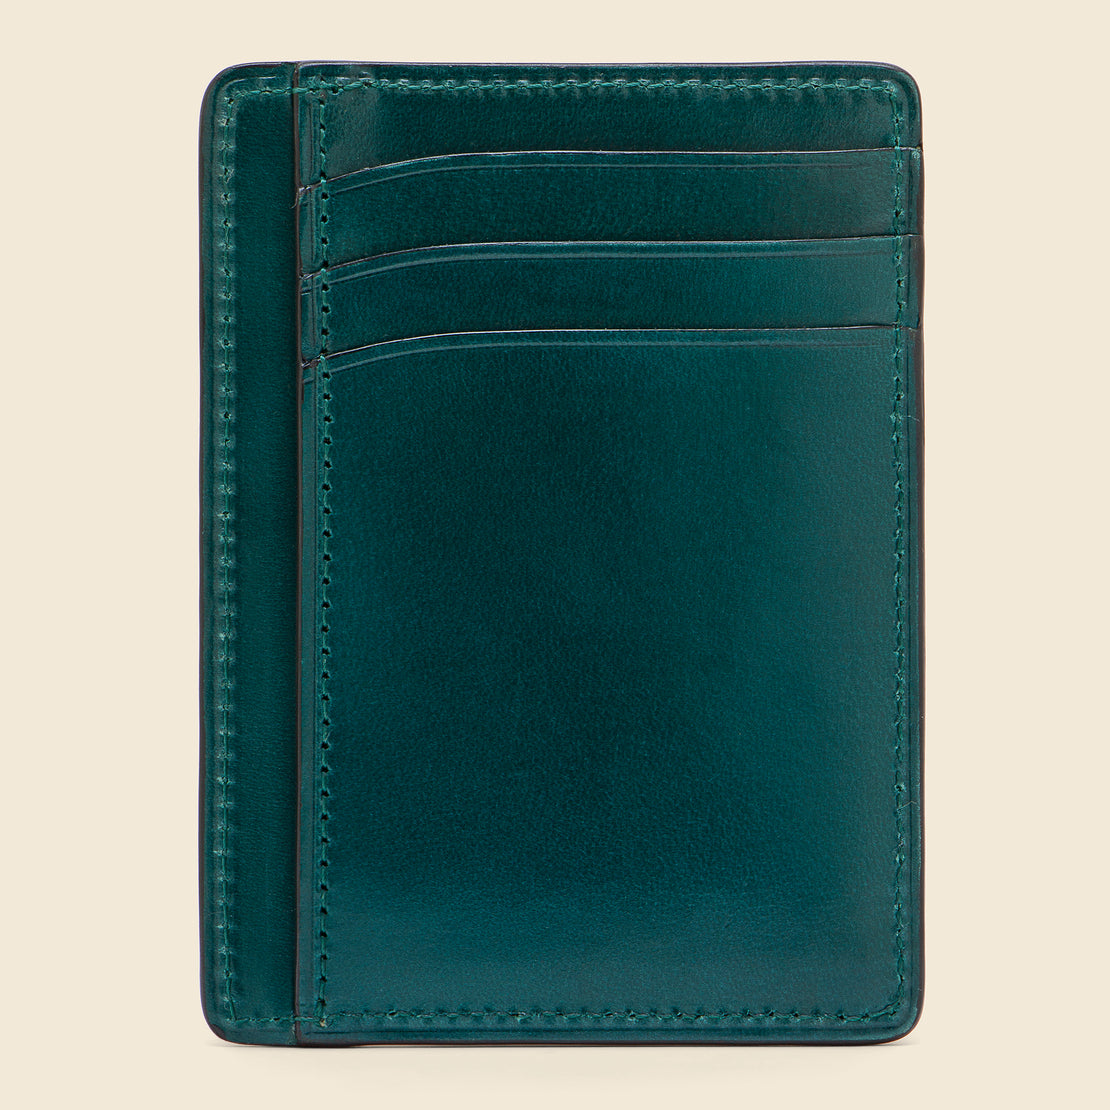 Card and Document Case - Evergreen - Il Bussetto - STAG Provisions - Accessories - Wallets